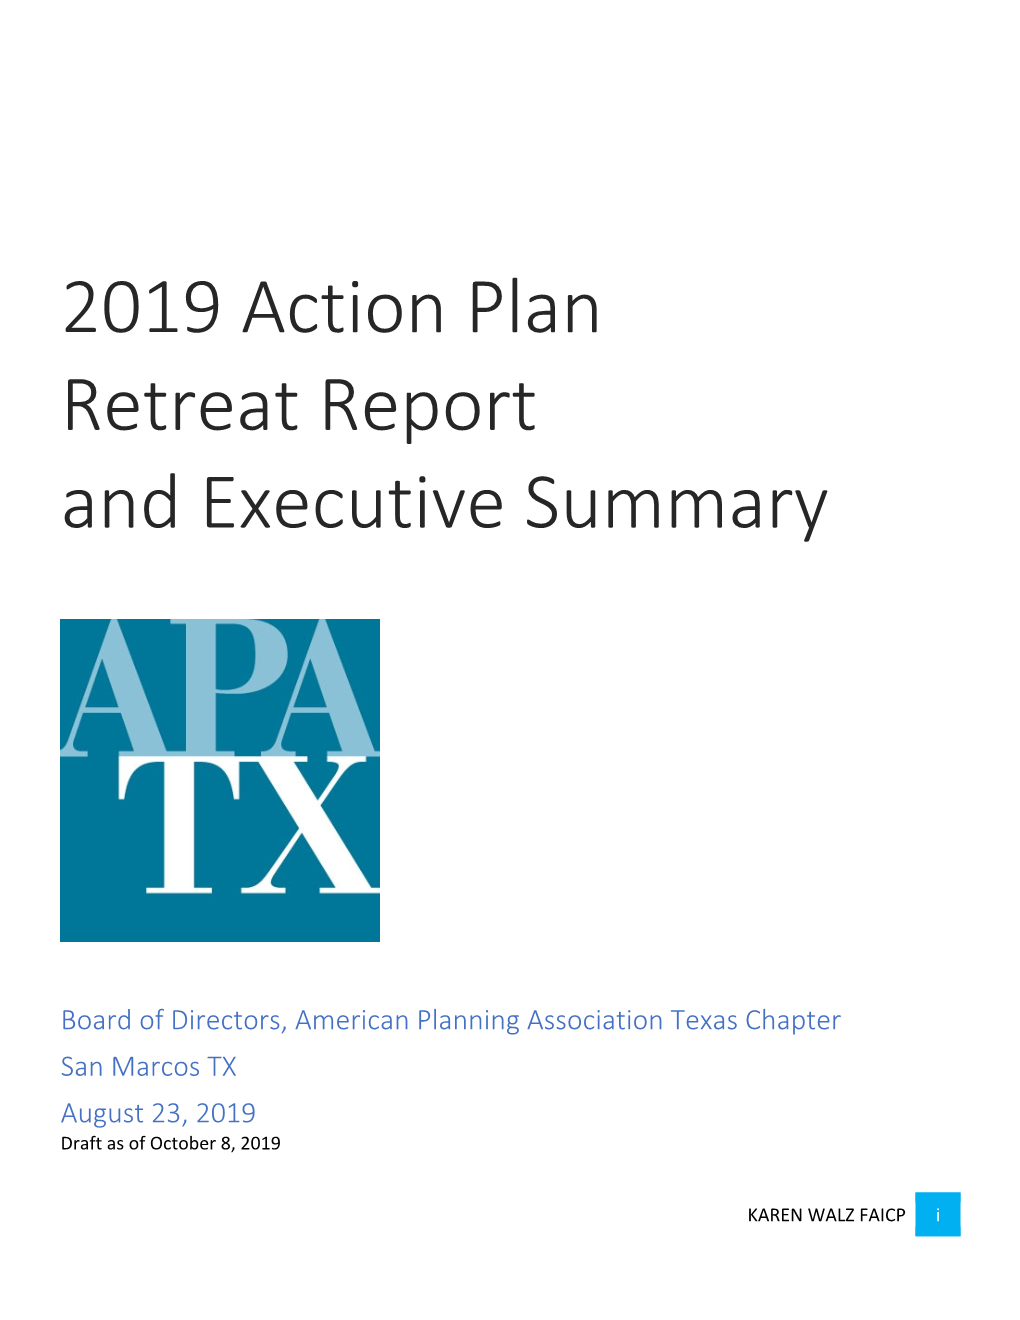 2019 Action Plan Retreat Report and Executive Summary